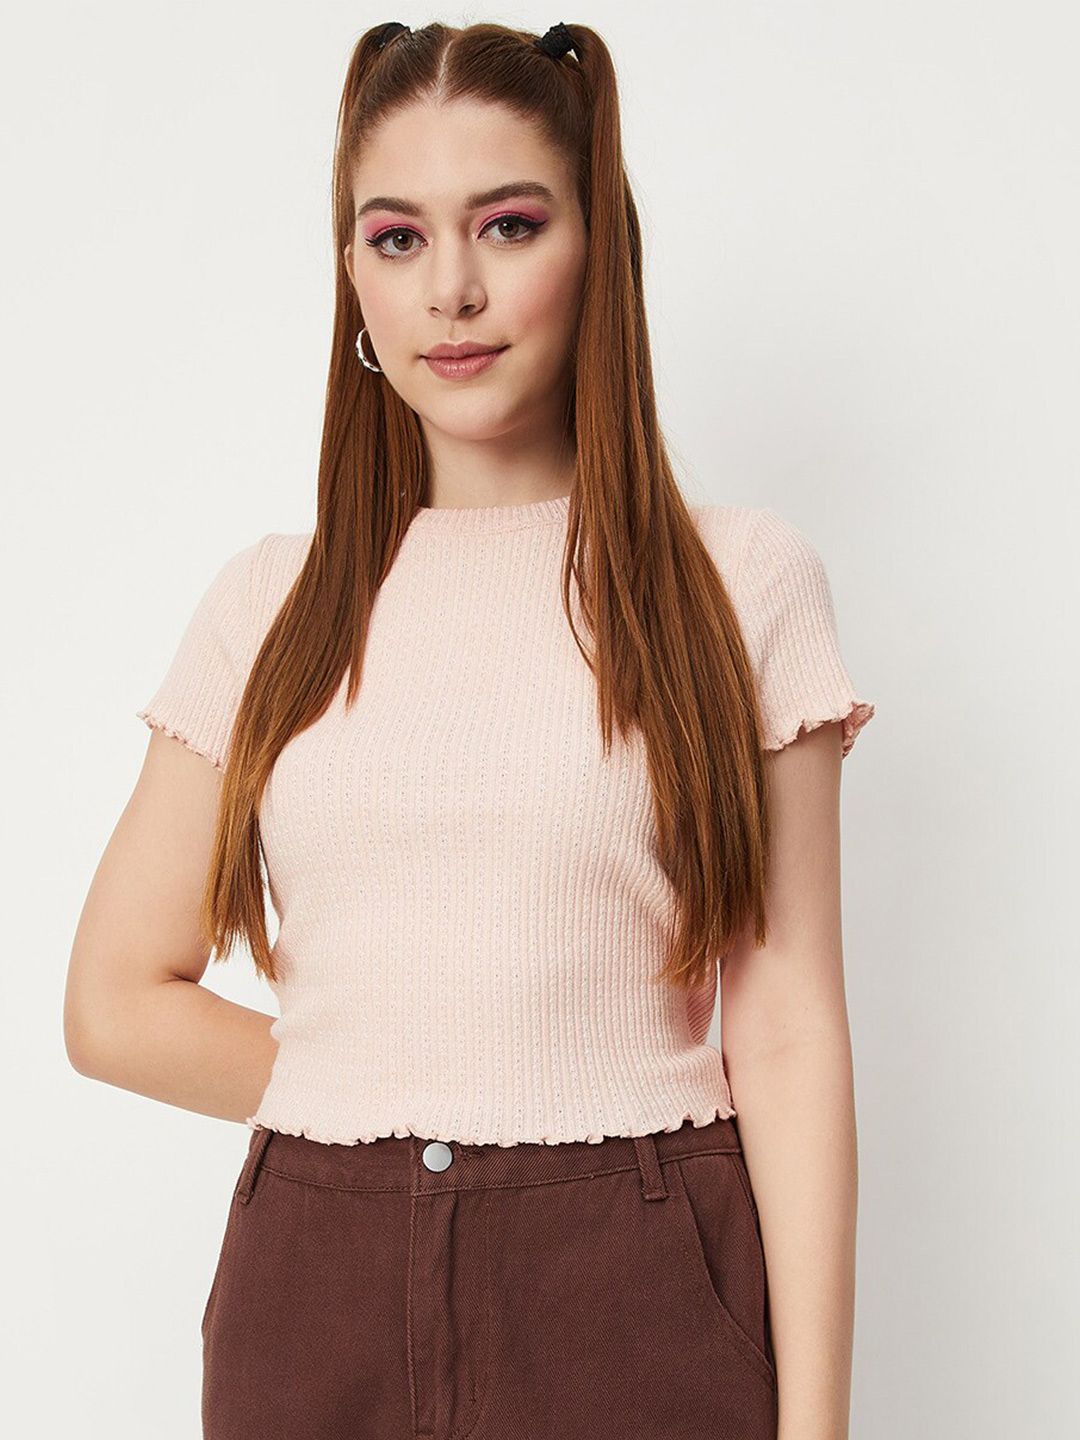 max Round Neck Short Sleeves Fitted Top Price in India